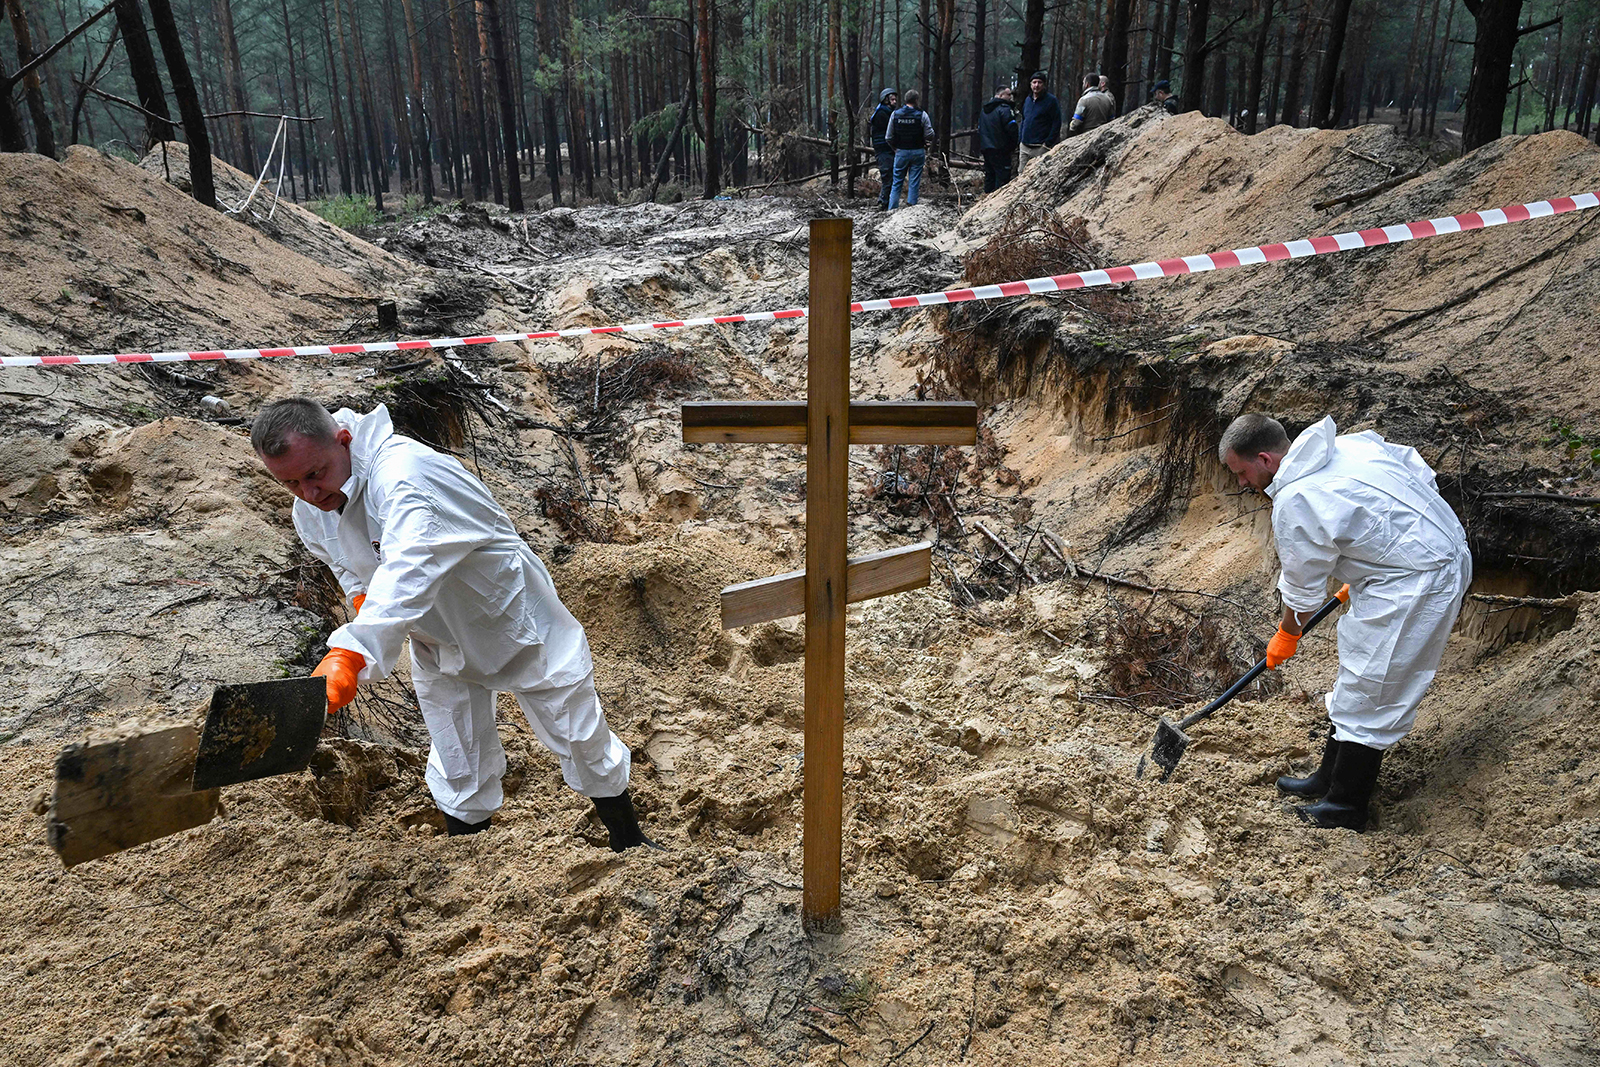 Forensic technicians dig near a cross in a forest on the outskirts of Izyum, eastern Ukraine on Friday.